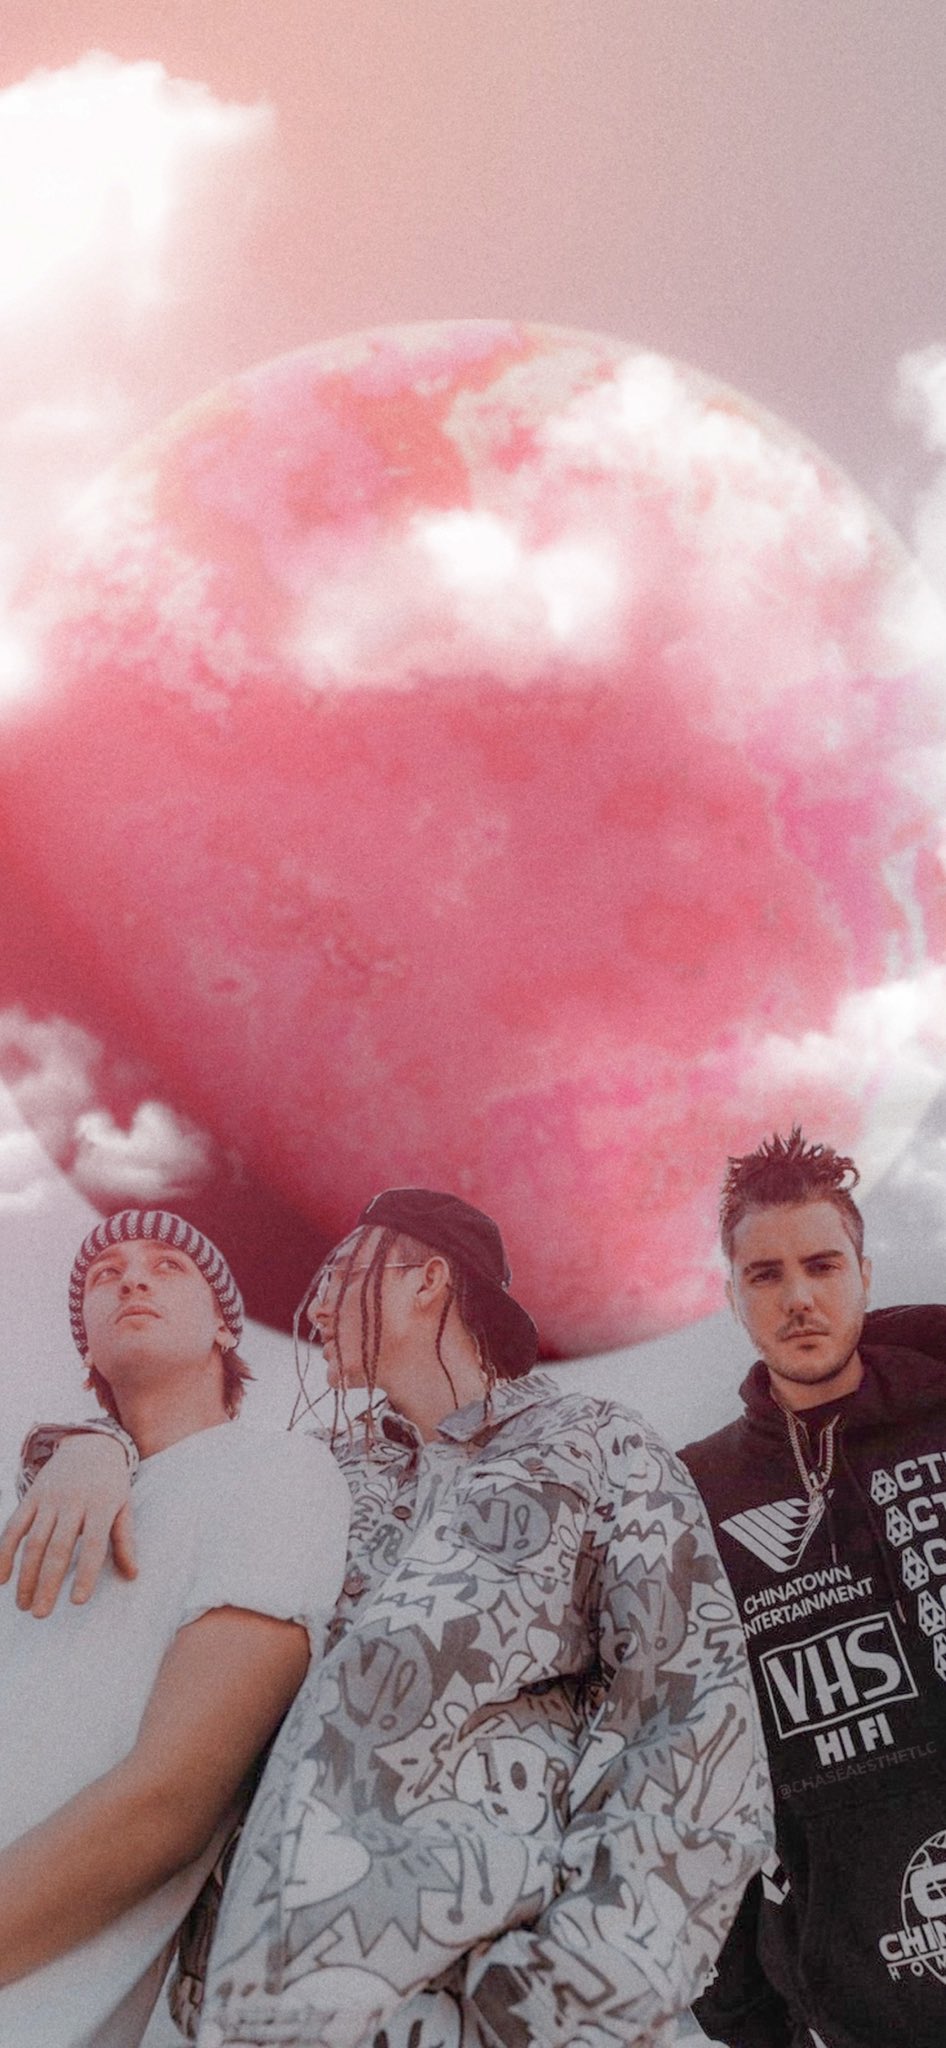 THIS IS ONLY A DISTRACTION  Chase Atlantic Lockscreens please likerb if  you